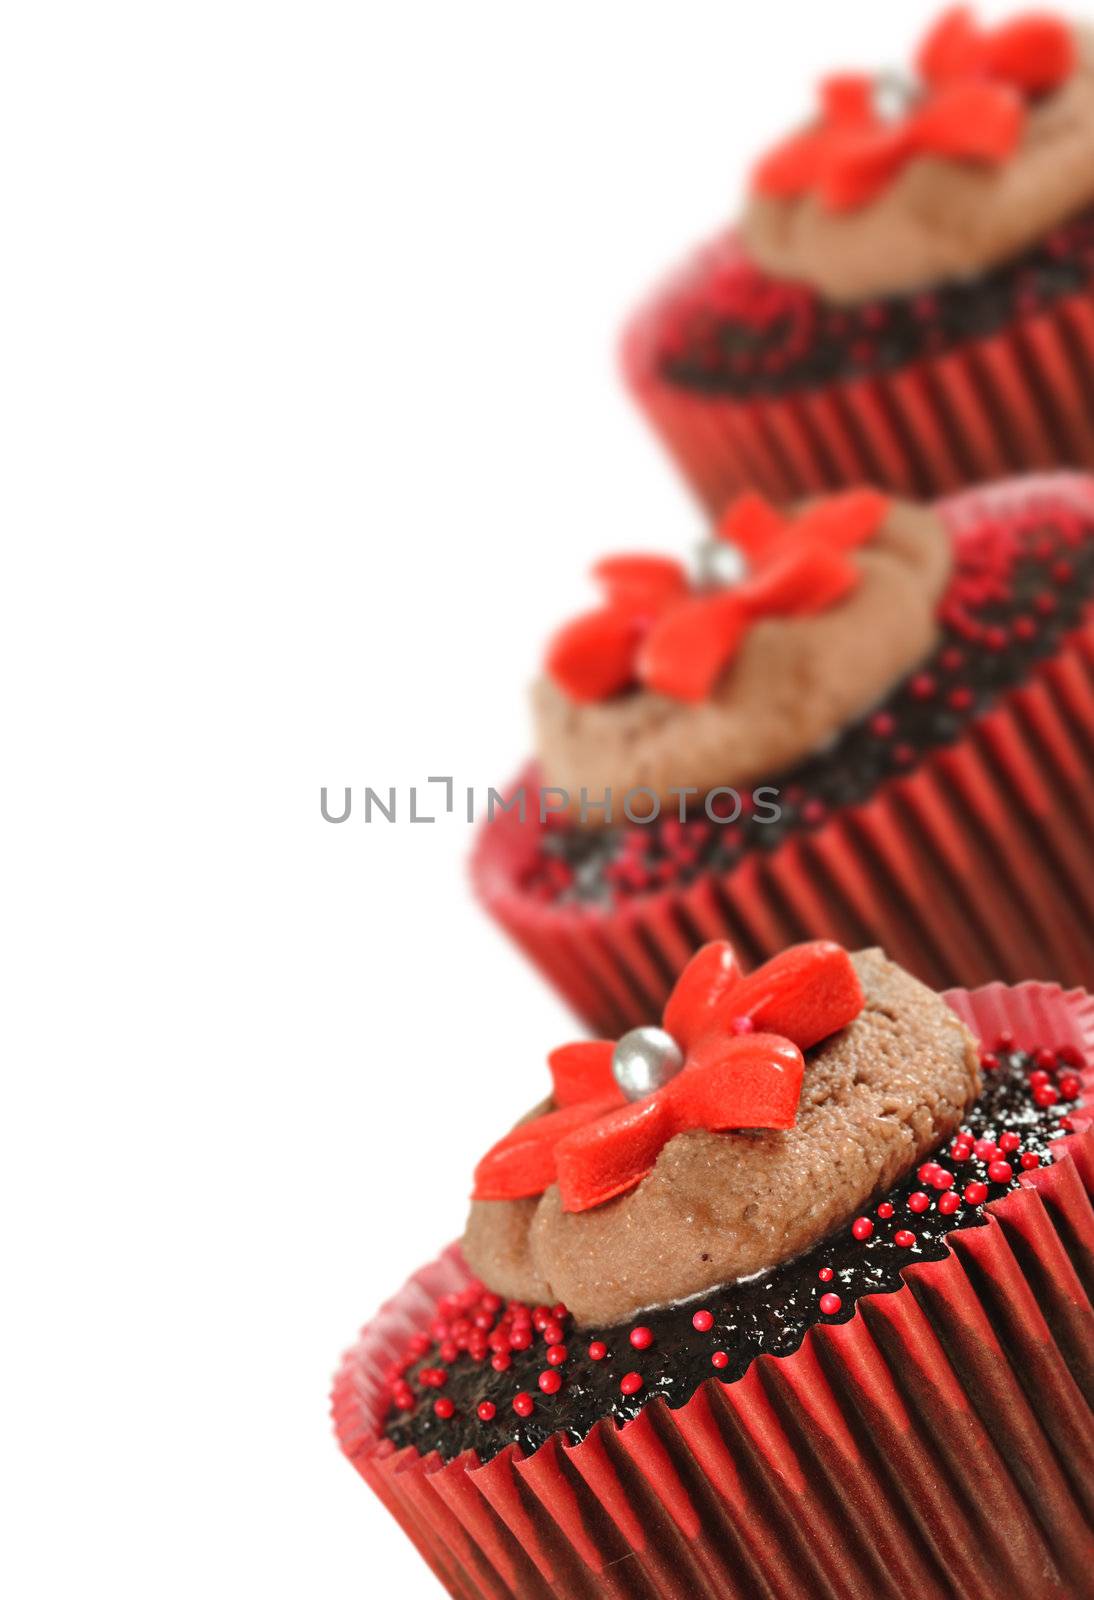 Chocolate cupcakes in red cups by tish1